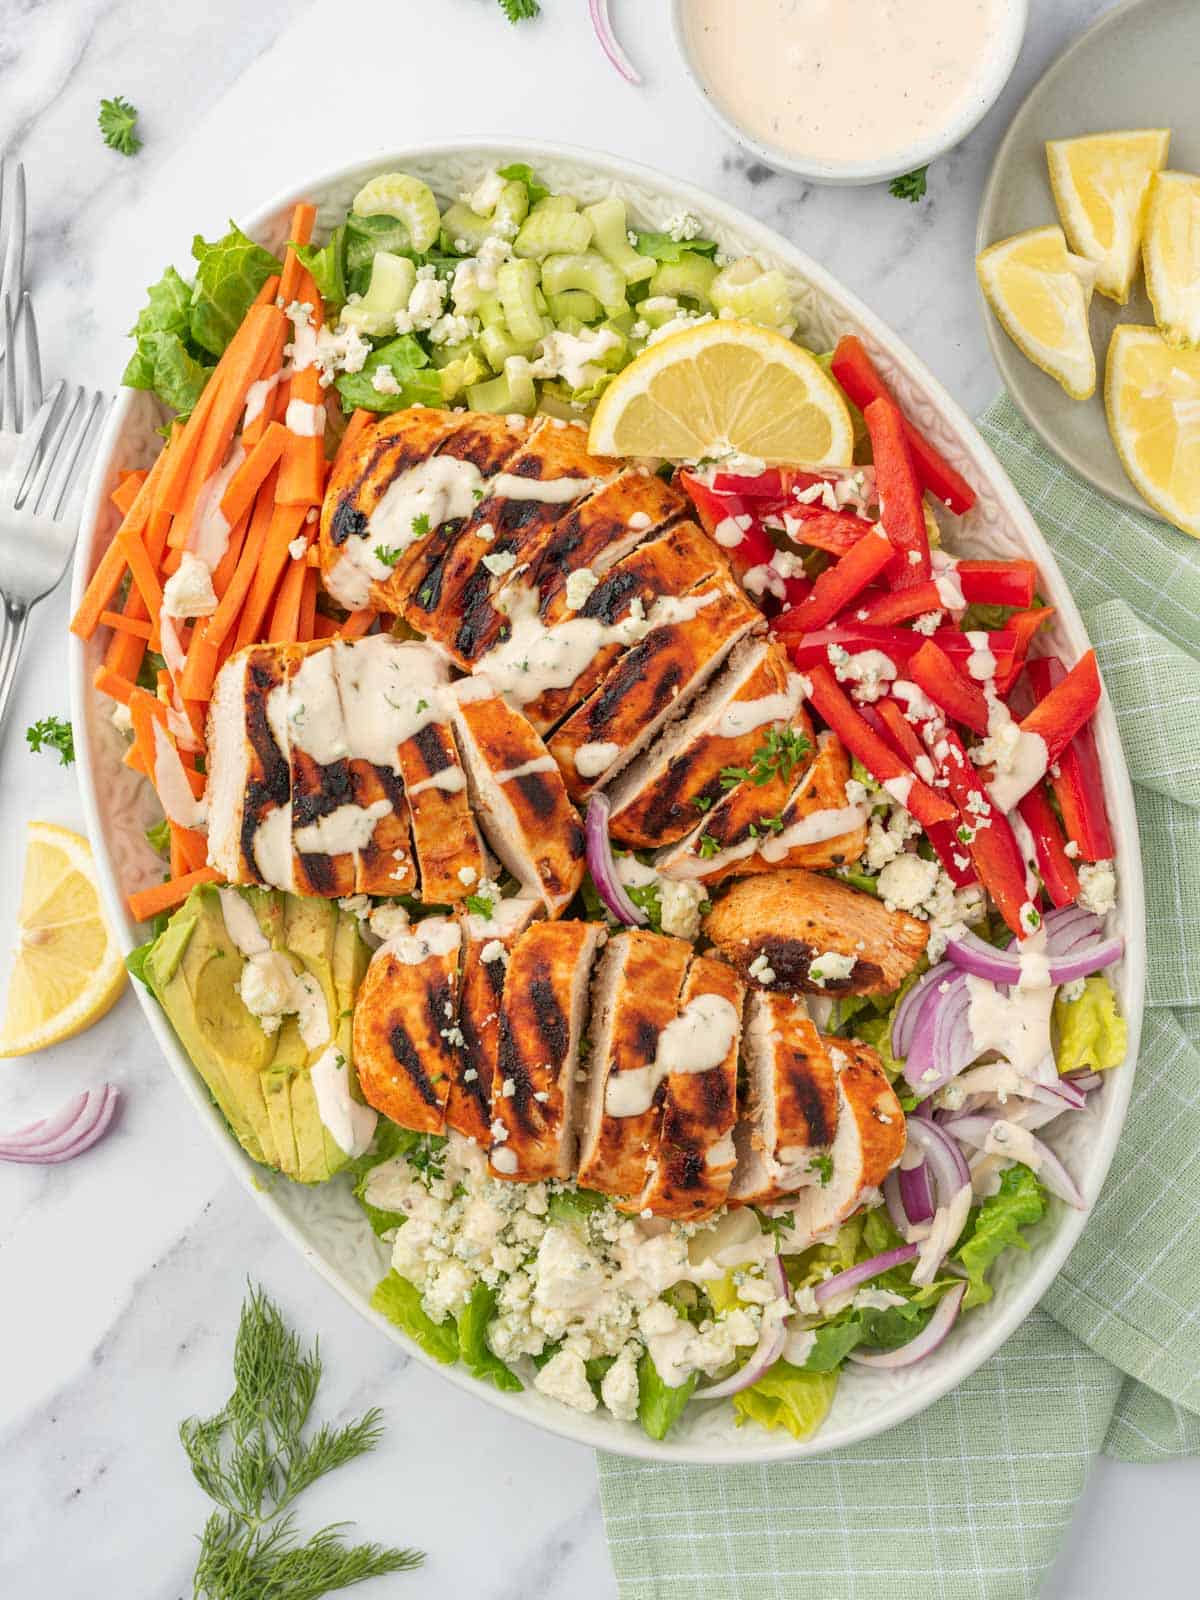 A platter of salad with buffalo chicken.